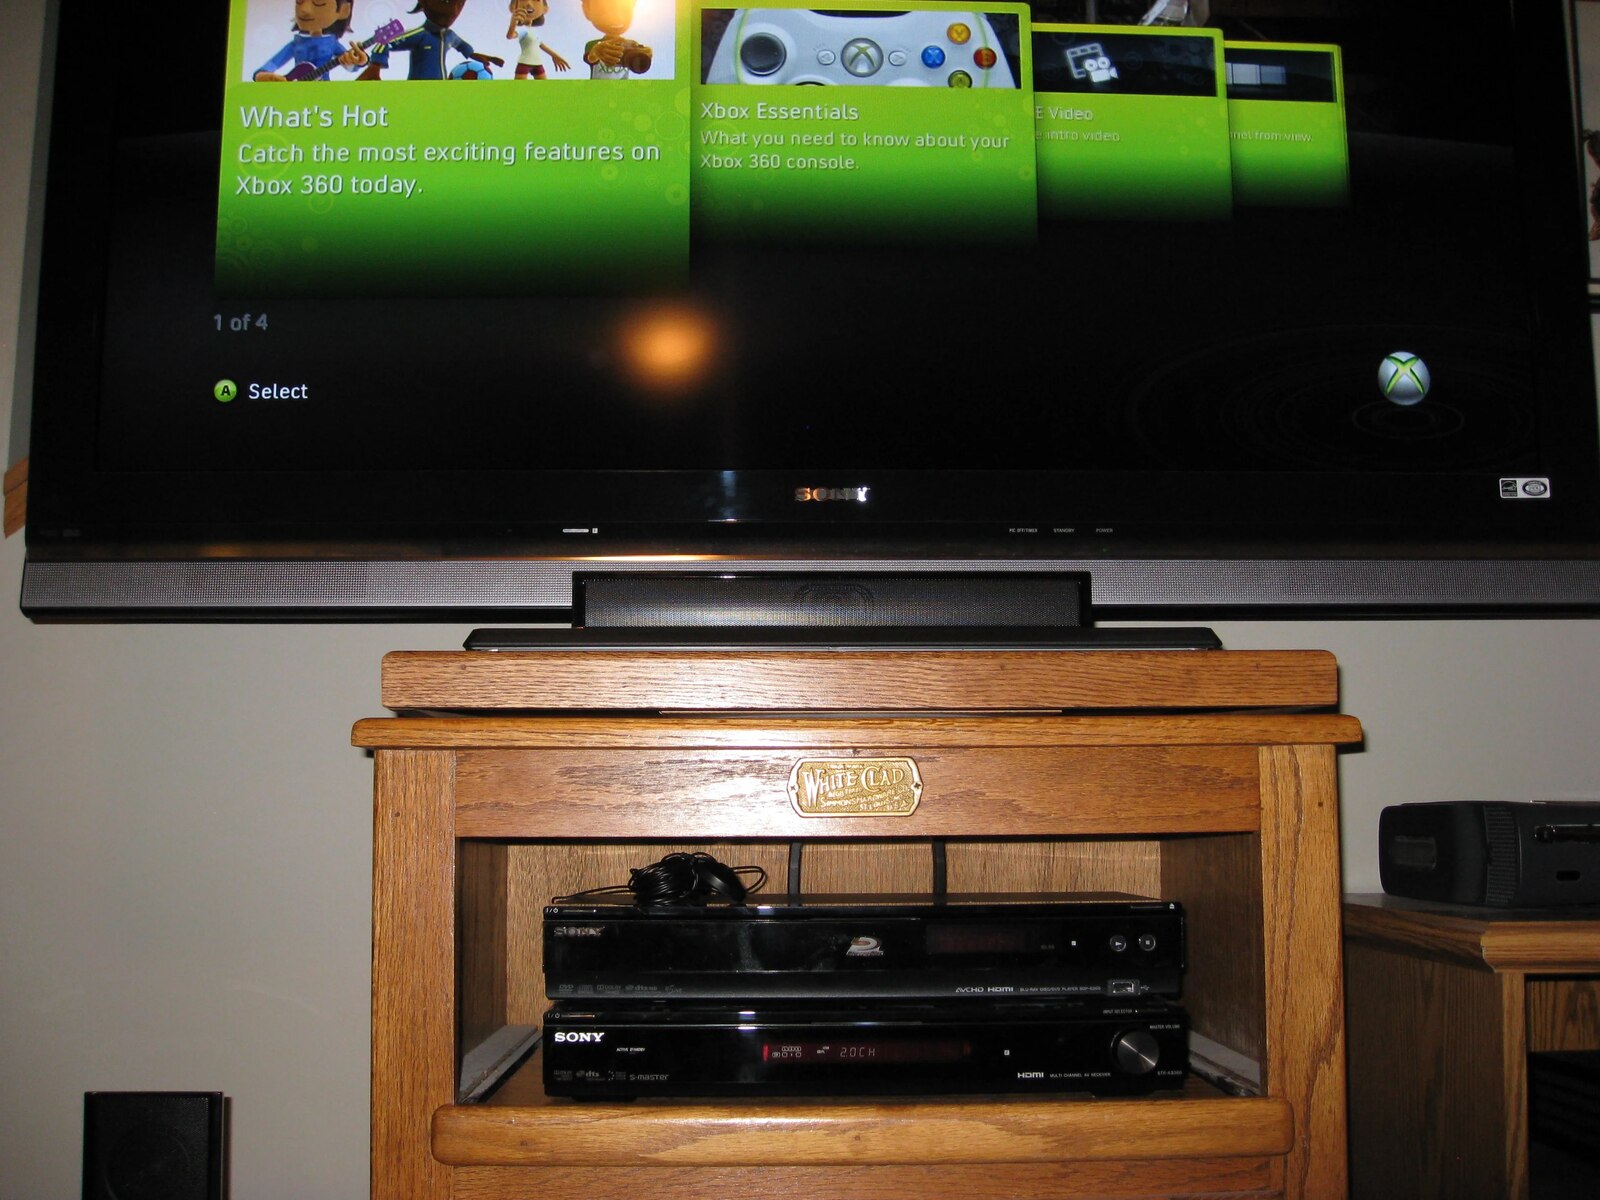 How To Connect Xbox 360 To Surround Sound System